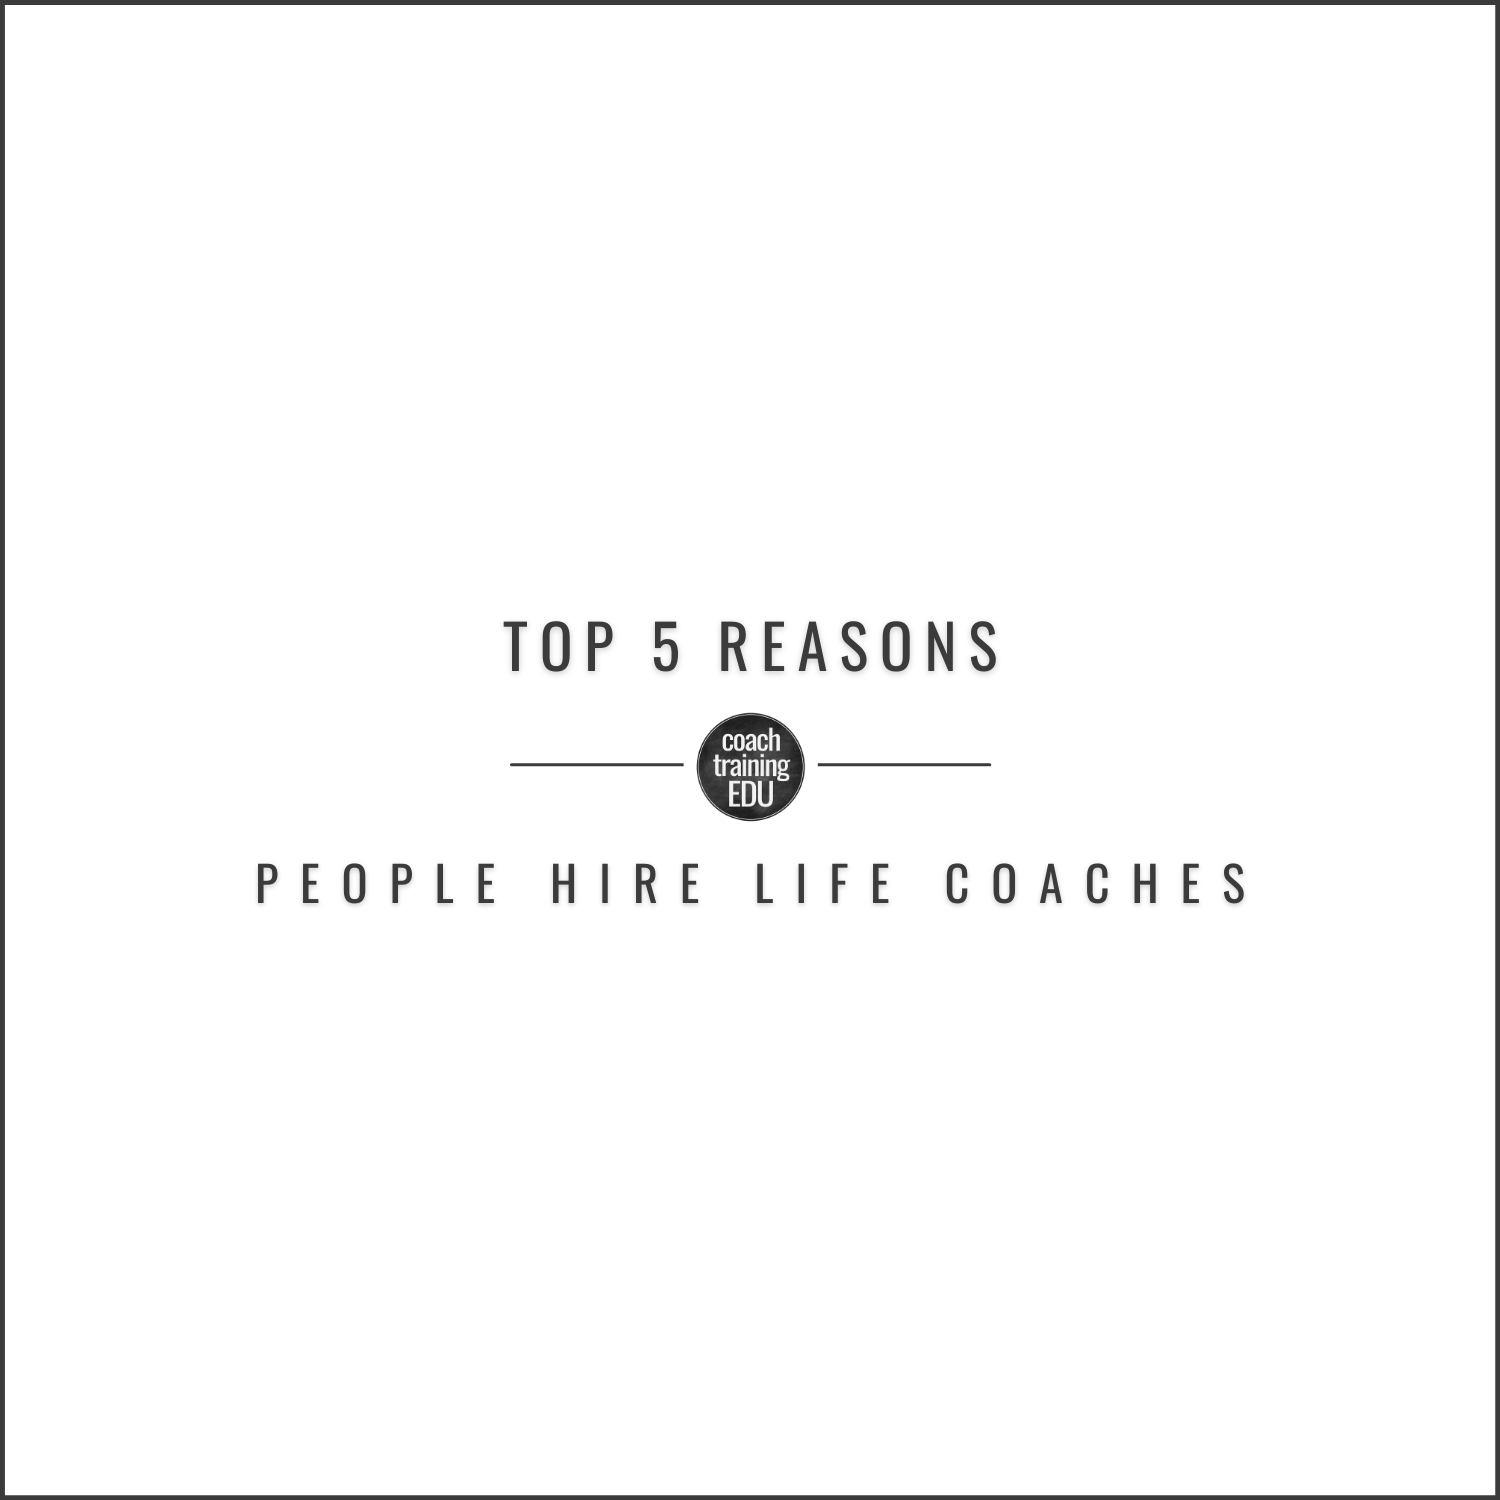 Top 5 Reasons People Hire Life Coaches